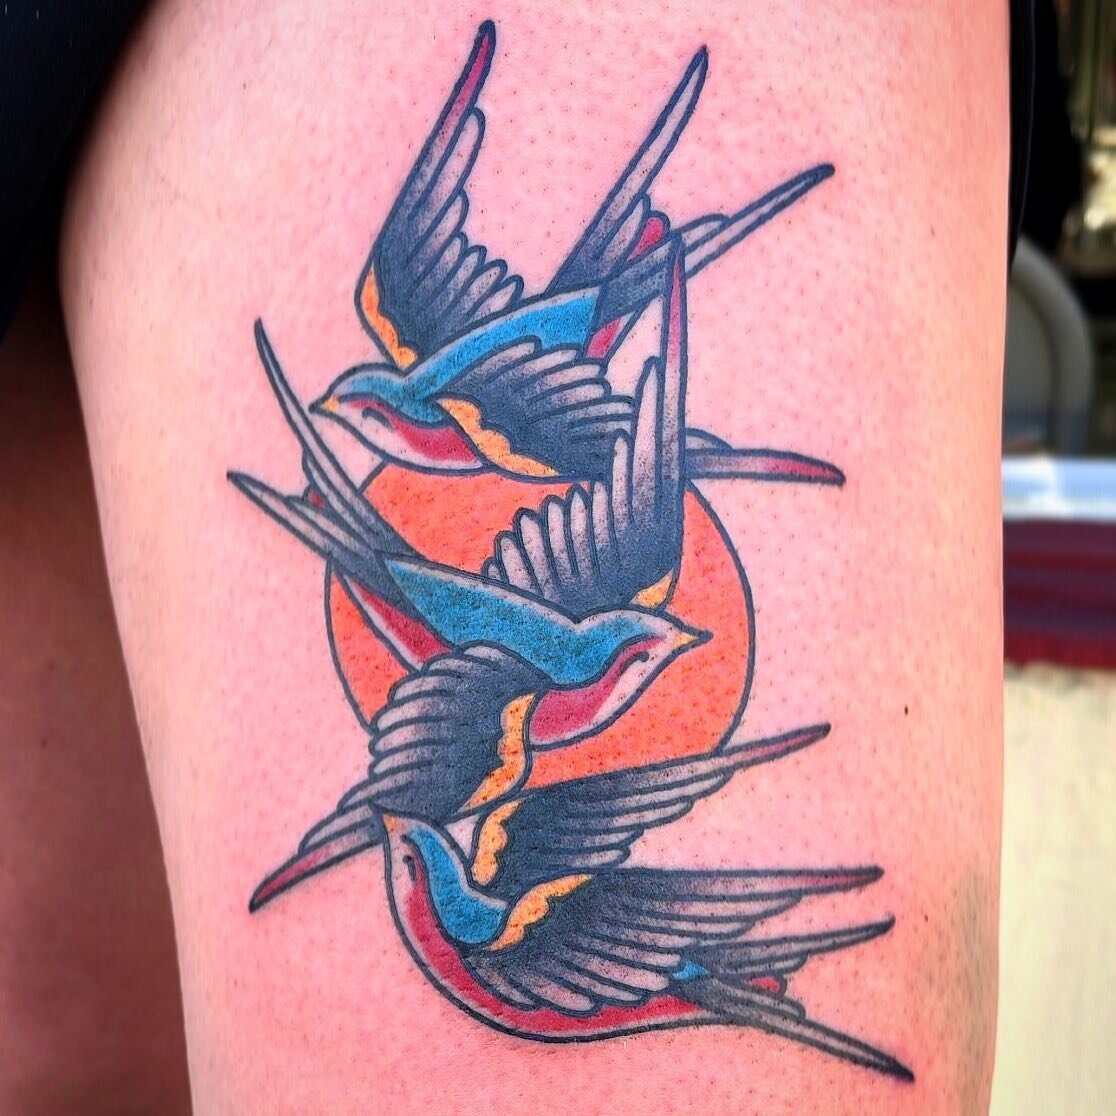 Here&rsquo;s an American traditional inspired sparrow tattoo that @kd1904 made on Courtney over the weekend!  Thanks so much for trusting us with your first color tattoo 💪🏽 More American Traditional please!  Clementinetattoo.com #clementinetattoo #